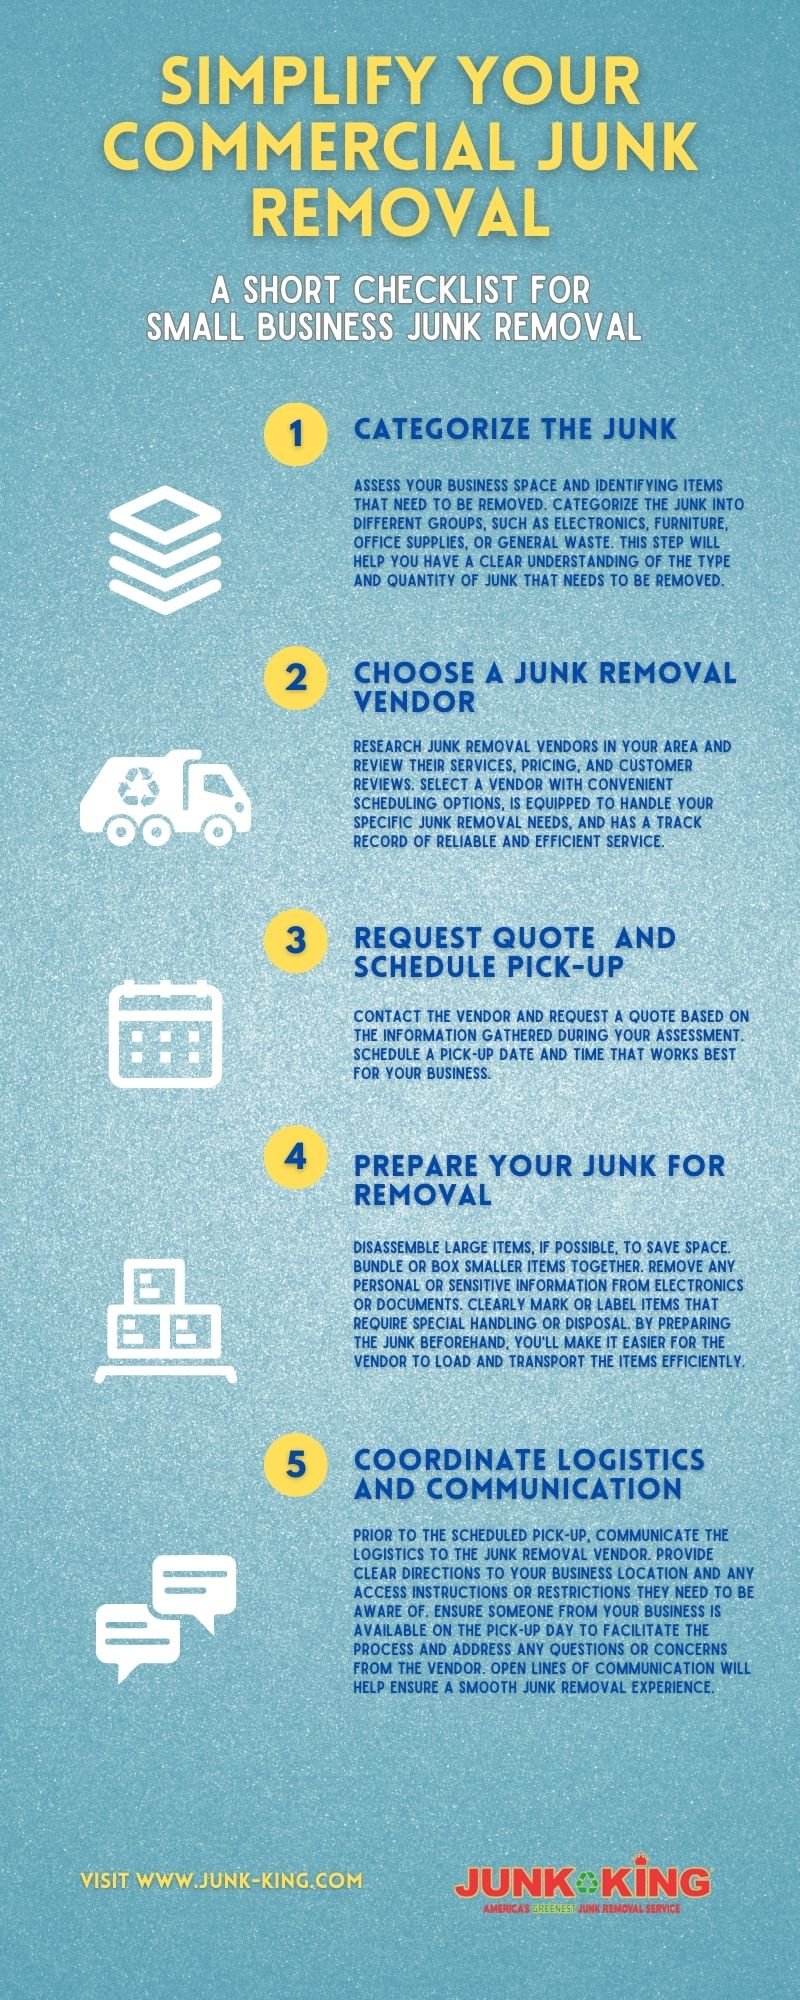 simplify-your-commercial-junk-removal